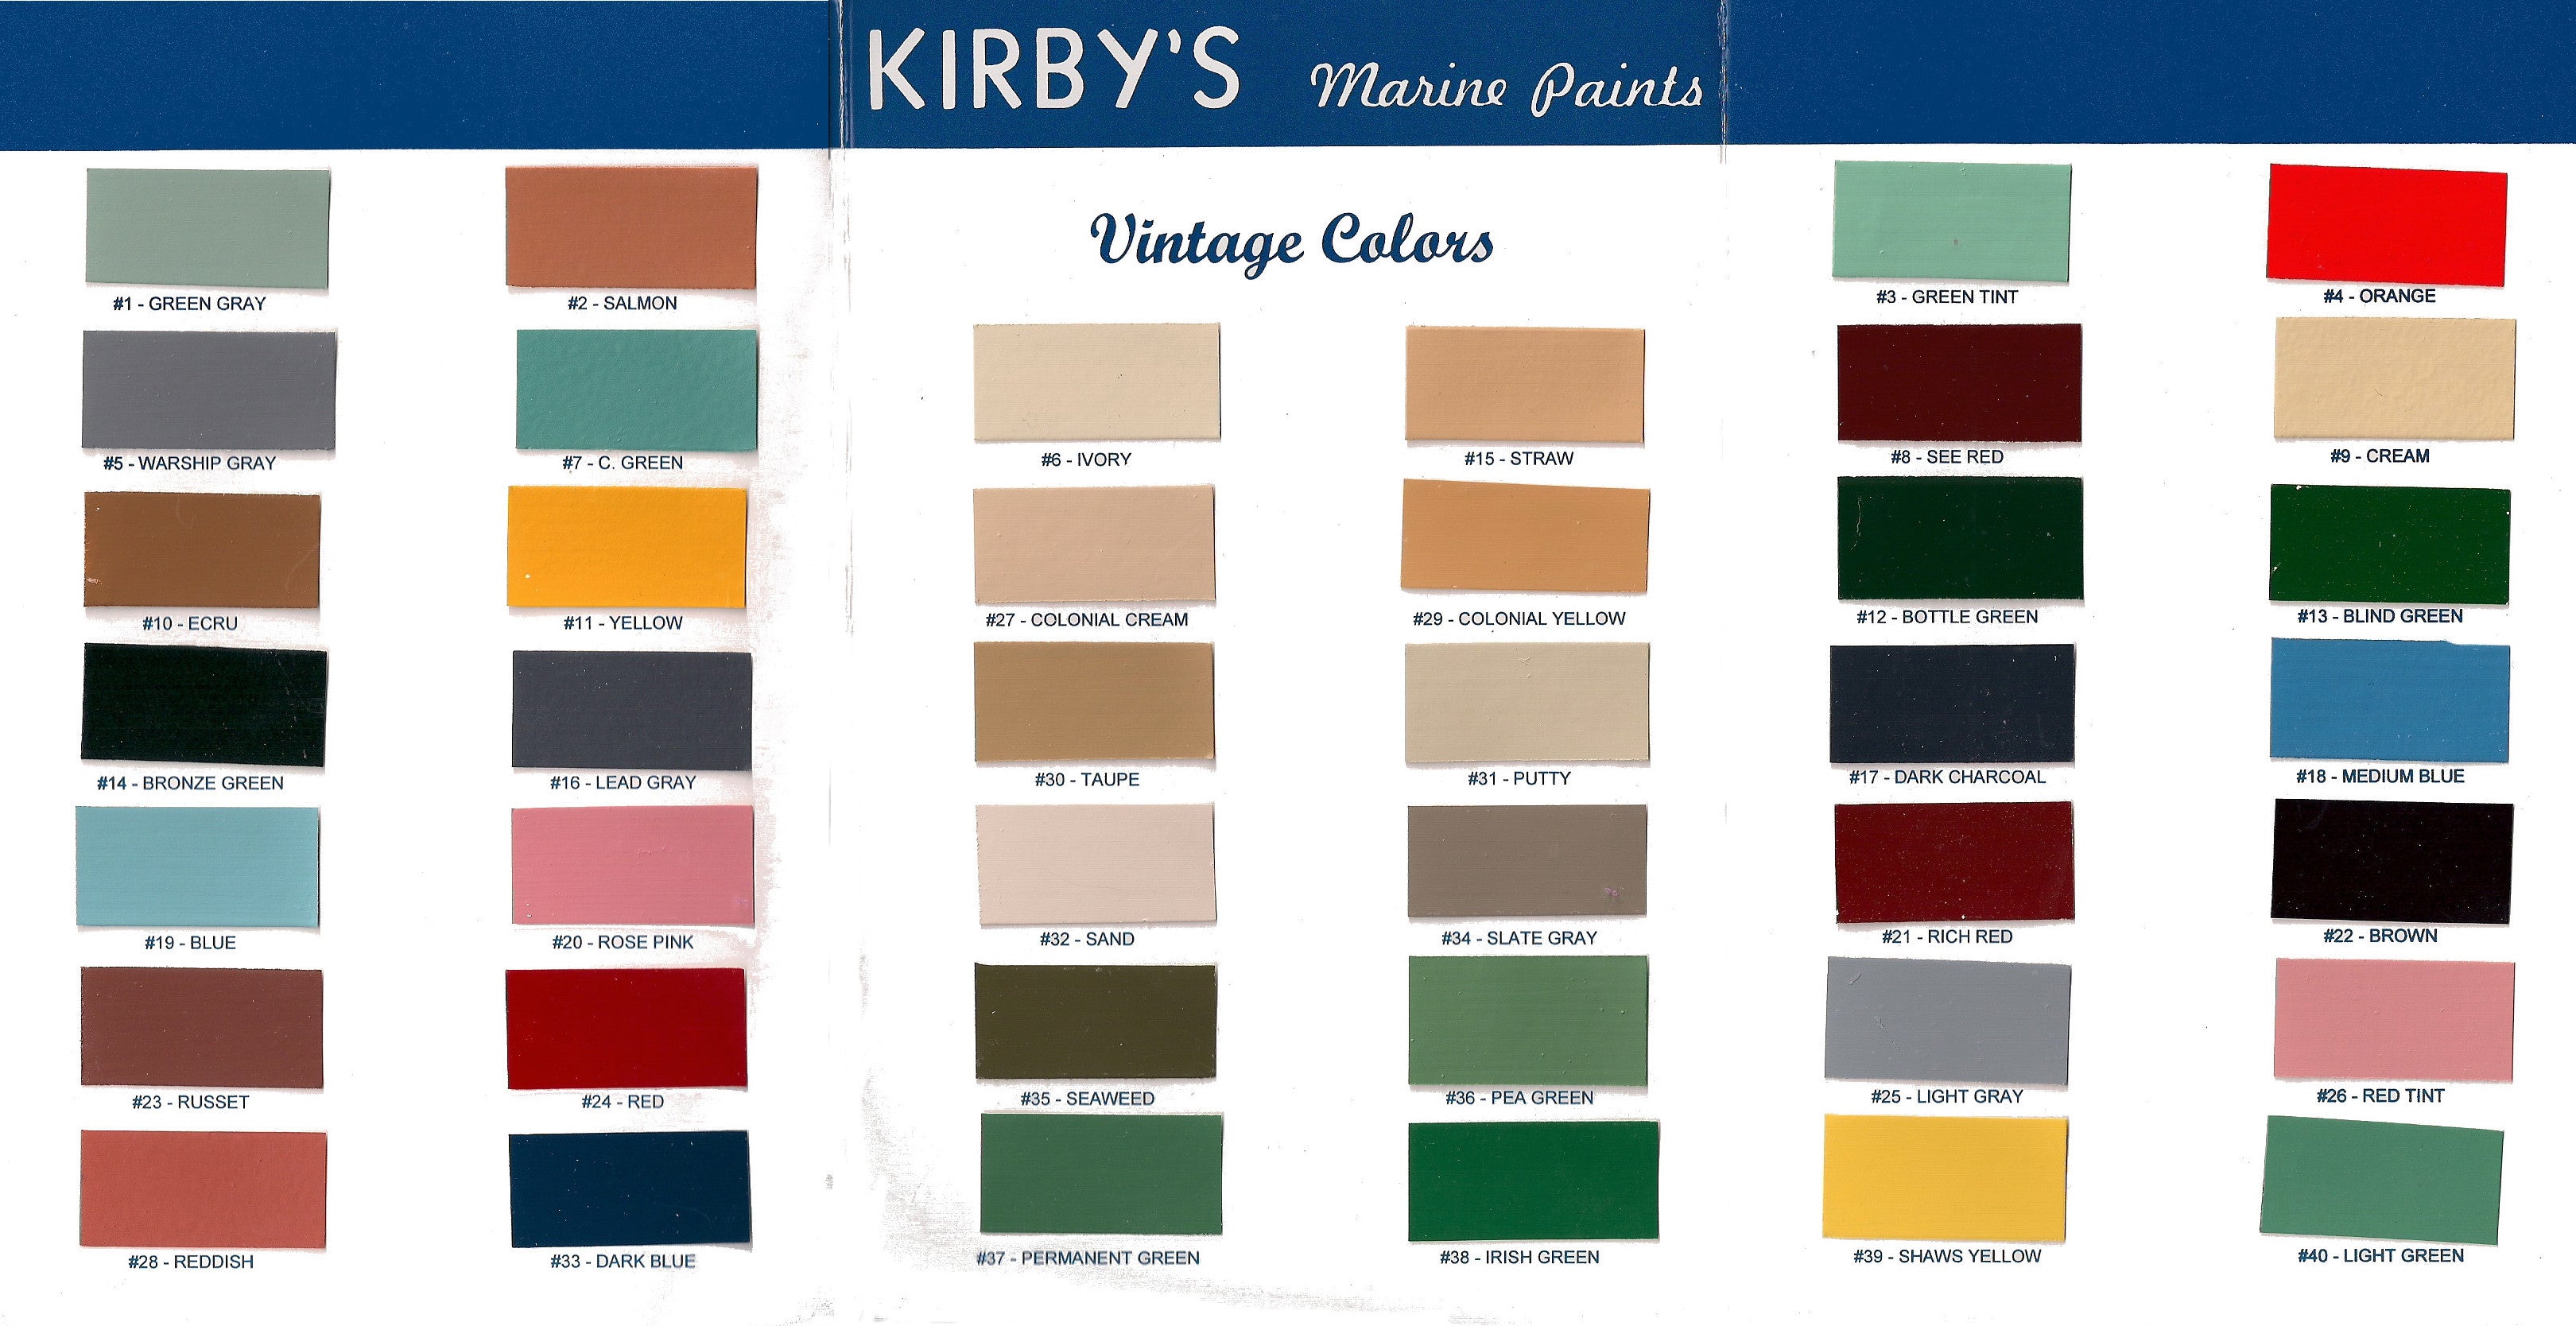 Kirby's Vintage Color Chart - George Kirby Jr. Paint Company